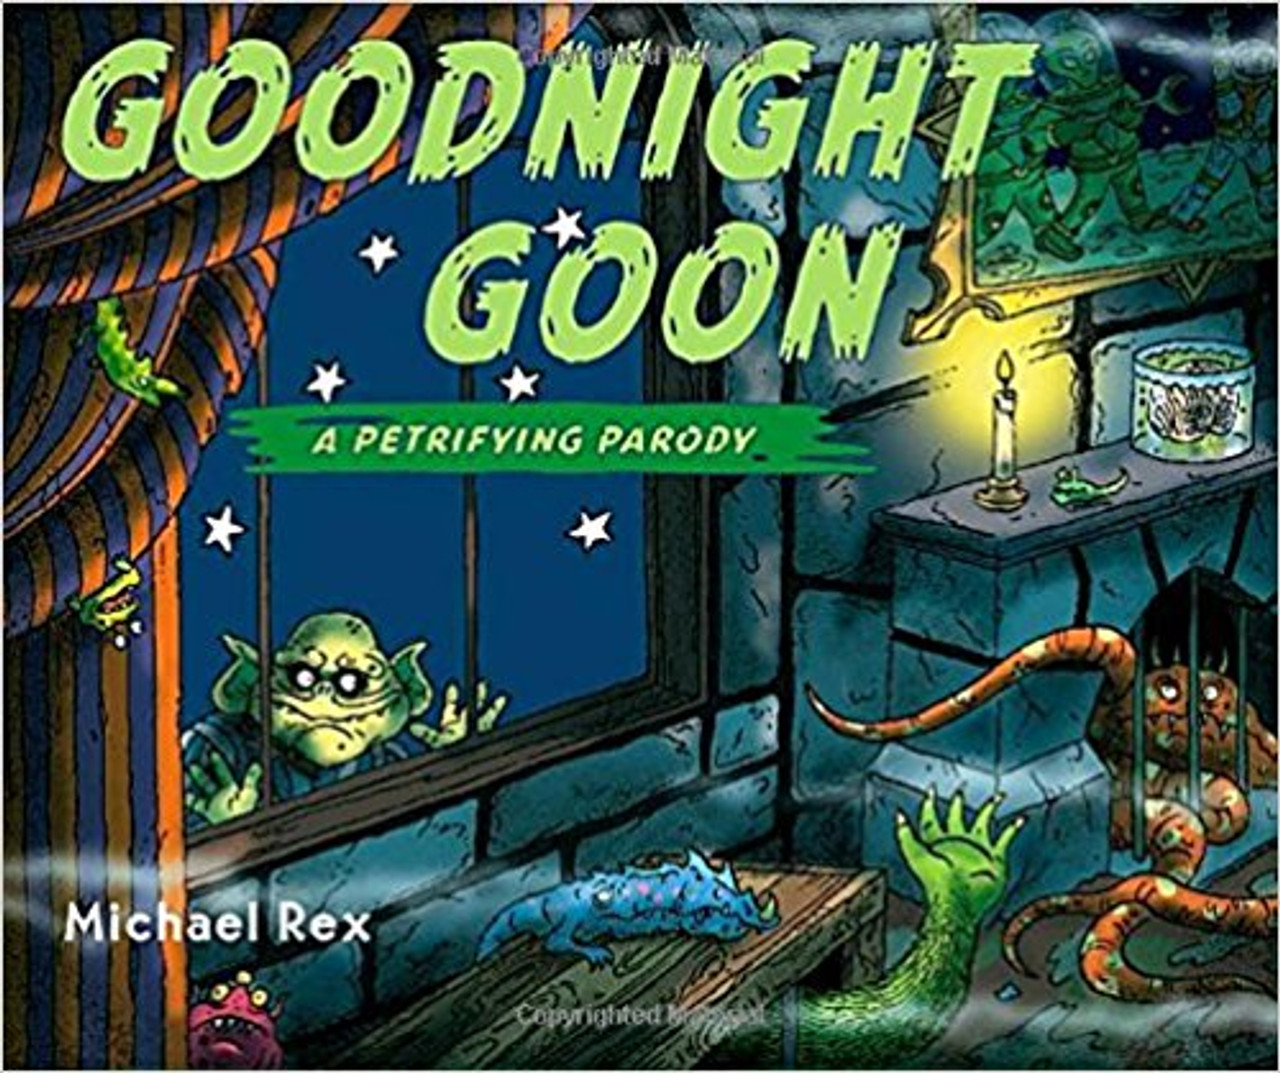 Goodnight tomb. Goodnight goon. Goodnight Martians taking over the moon.
It's bedtime in the cold gray tomb with a black lagoon, and two slimy claws, and a couple of jaws, and a skull and a shoe and a pot full of goo. But as a little werewolf settles down, in comes the Goon determined at all costs to run amok and not let any monster have his rest.